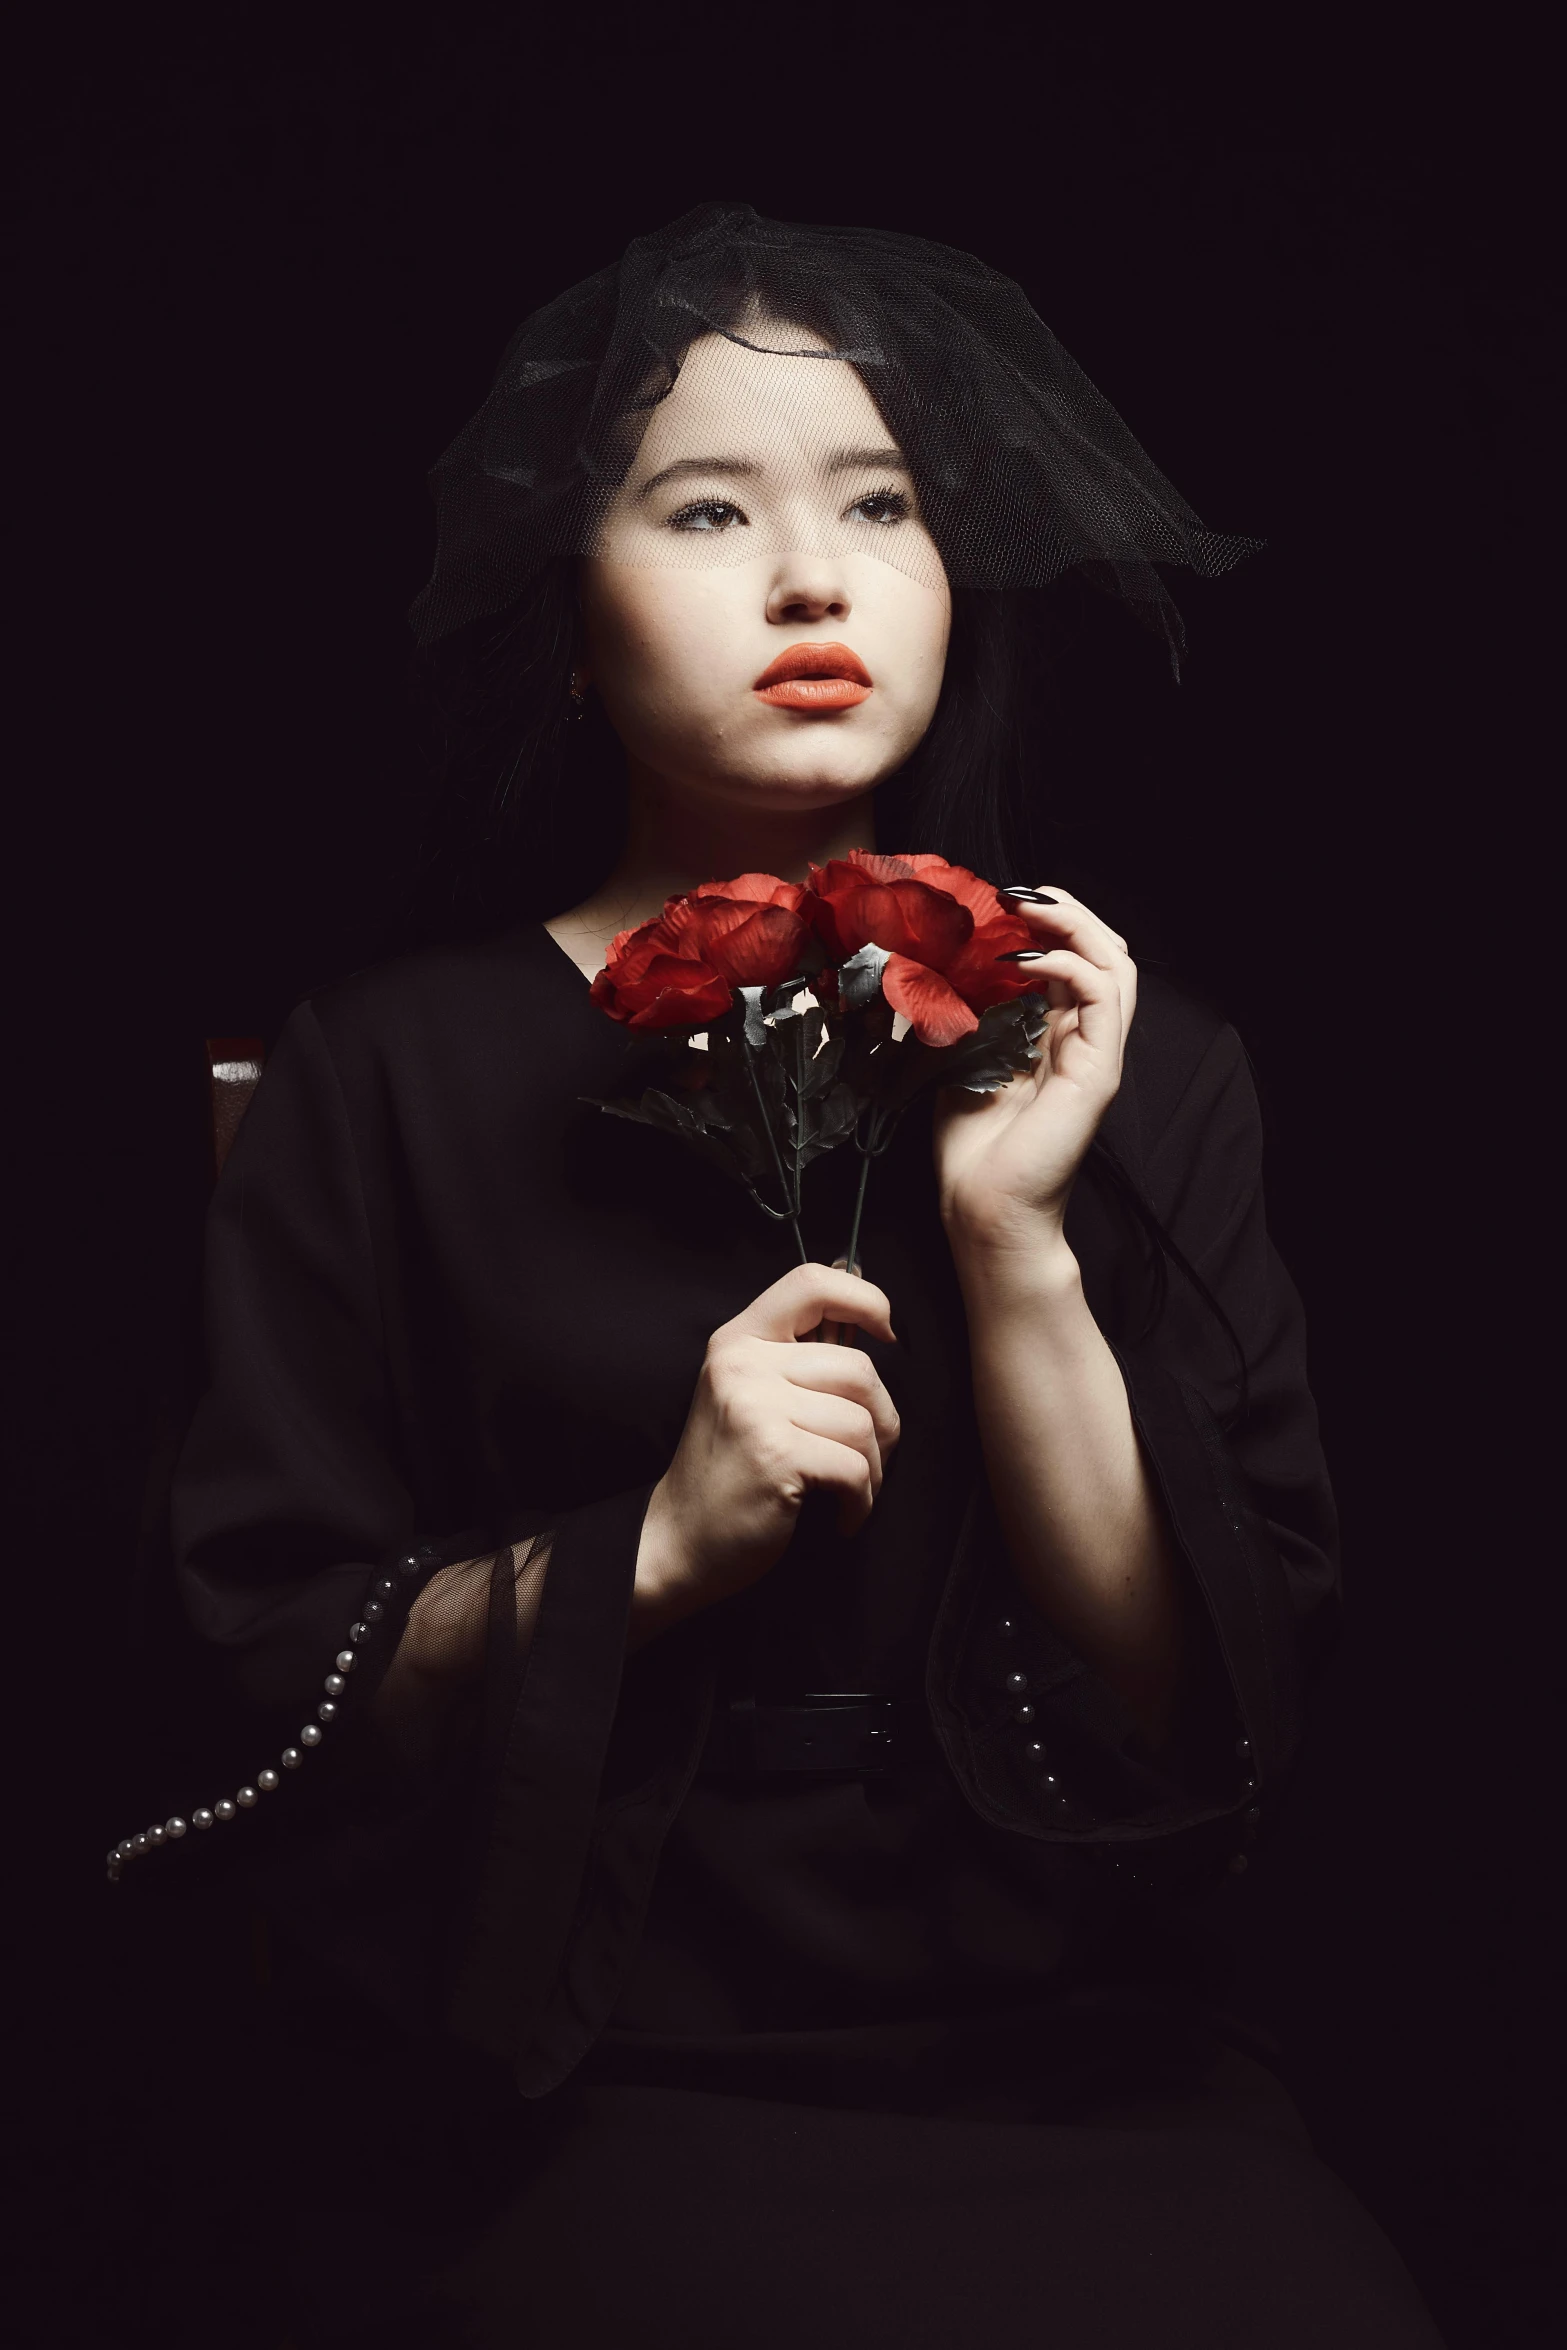 a woman in a black dress holding a red rose, an album cover, inspired by Ayako Rokkaku, pexels contest winner, ((portrait)), hoang long ly, melancholy, concert